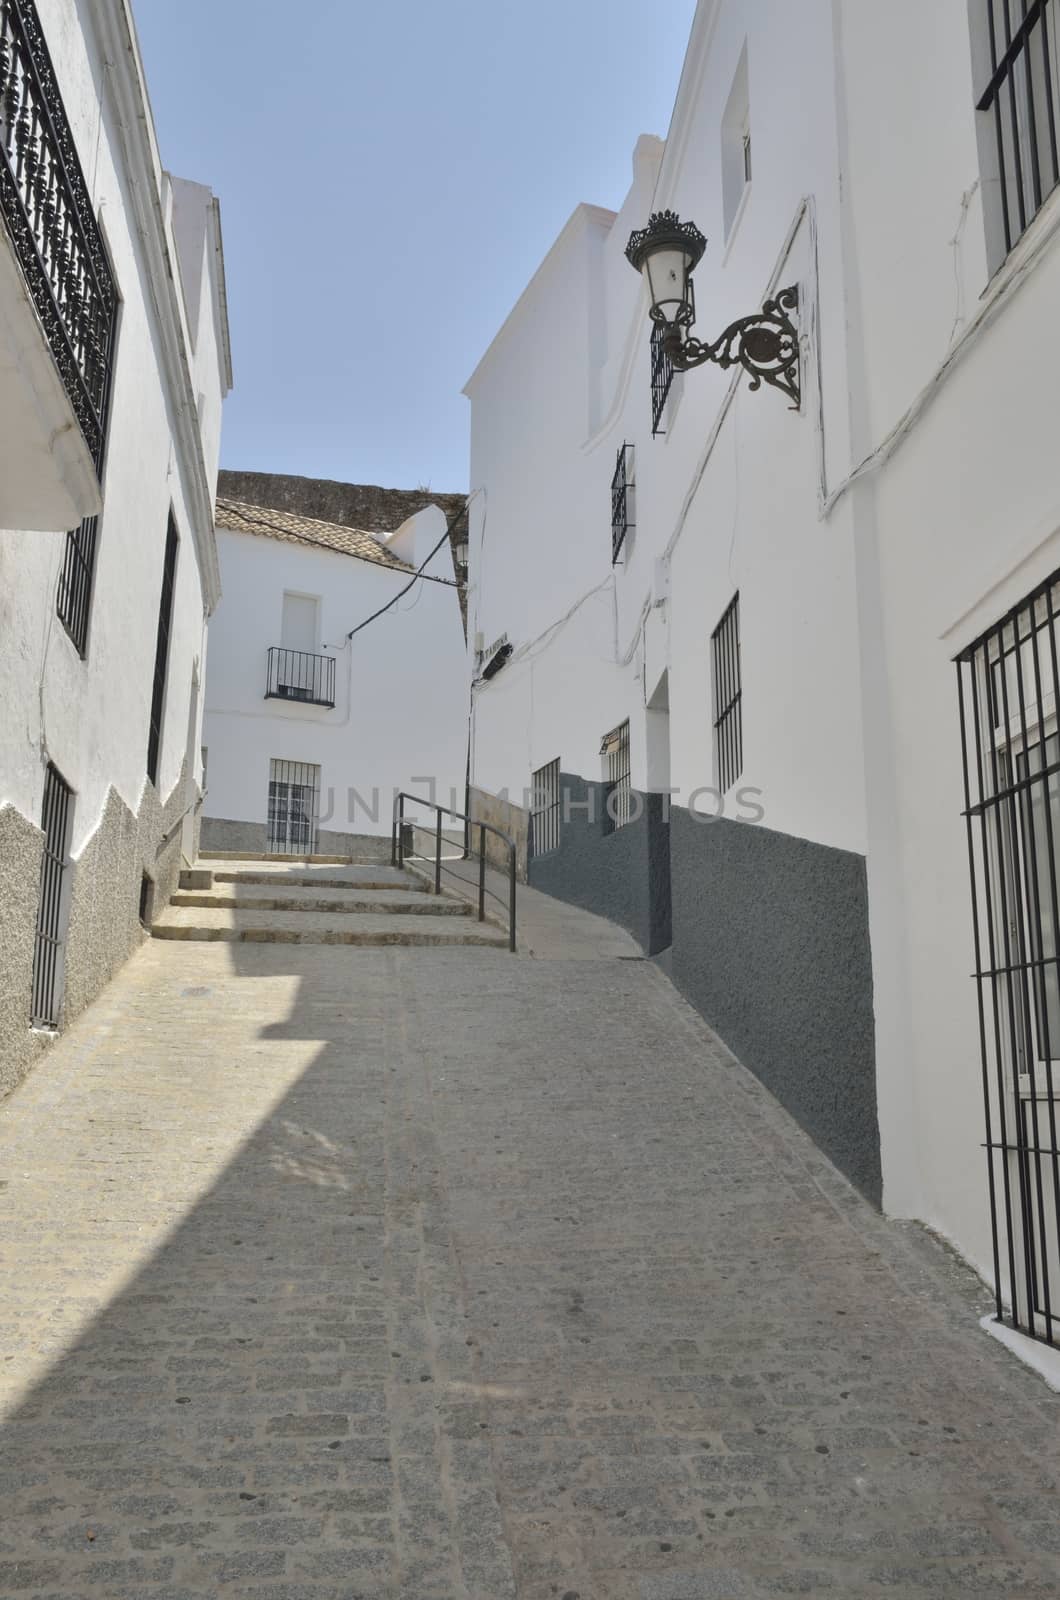 Street in the villlage of Medina Sidonia, a white town of the province of Cadiz, Andalusia, Spain